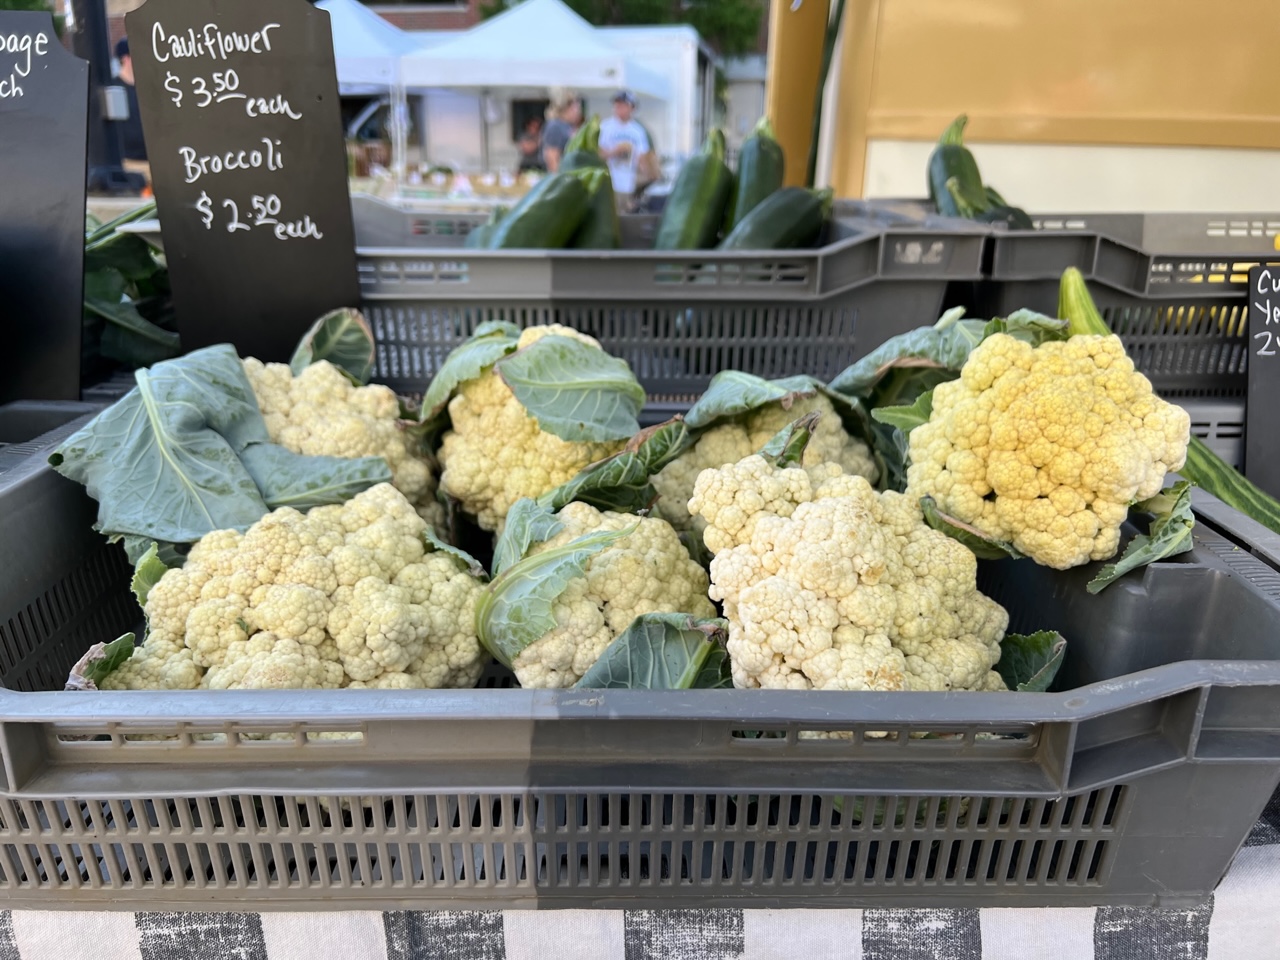 In a large gray plastic container, there are heads of cauliflower. Photo by Alyssa Buckley.